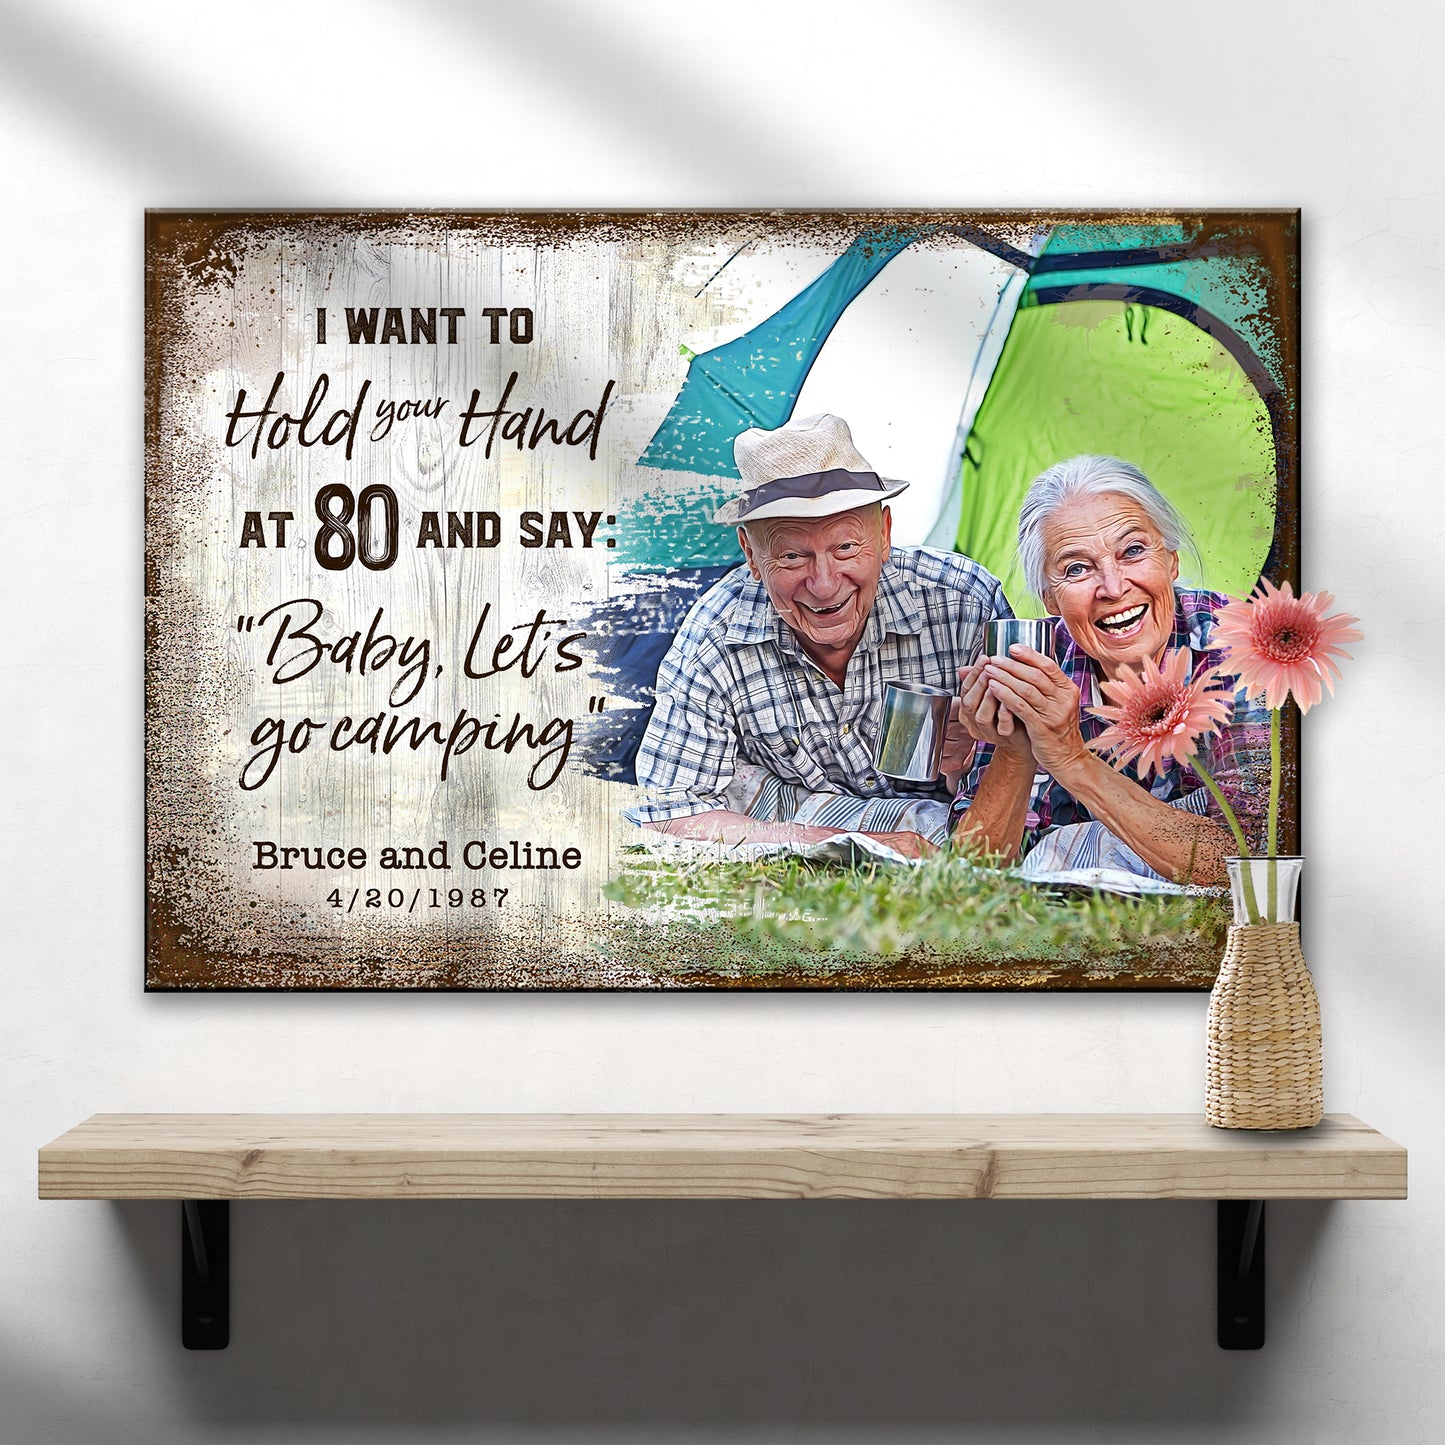 Baby Let's Go Camping Sign - Image by Tailored Canvases